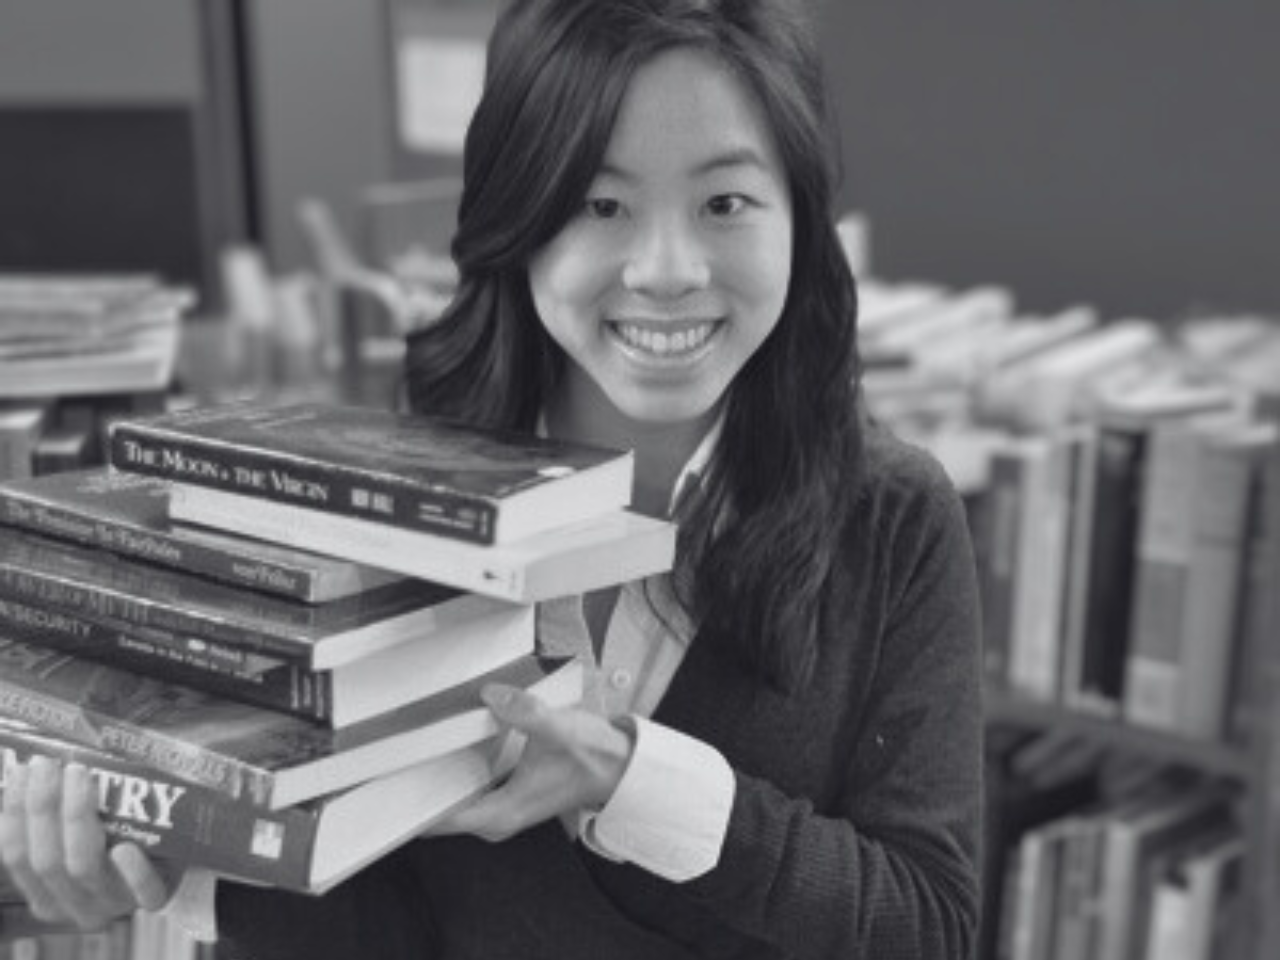 A reader poses with a stack of books.